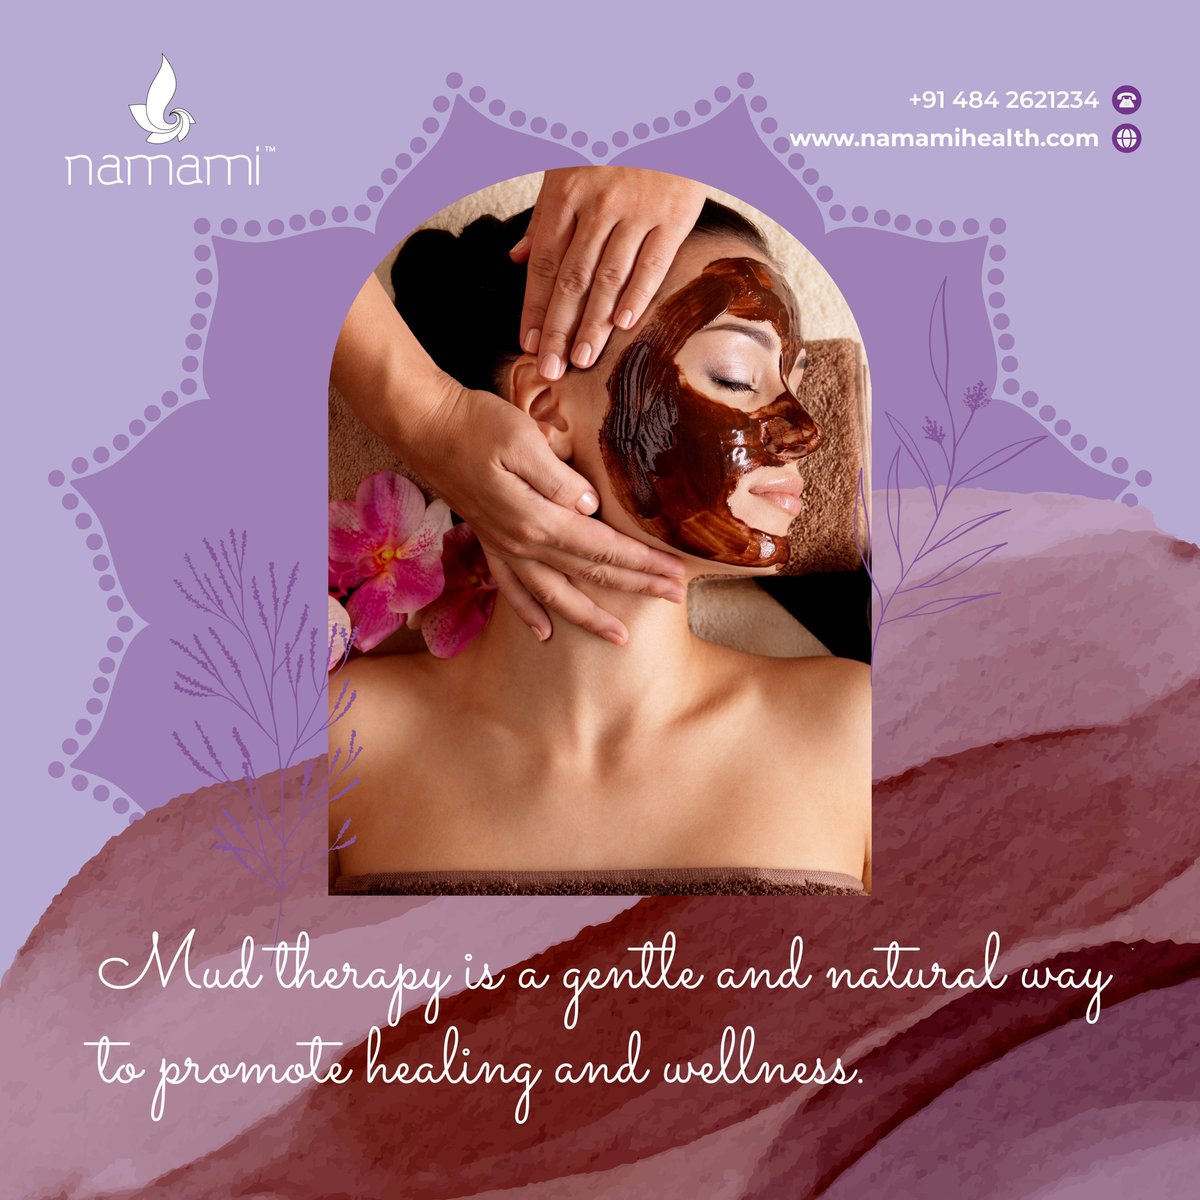 Namami offer guests the opportunity to experience the healing power of mud therapy after a consultation. Explore the natural and ancient form of healing.
#mudtherapy #detoxification #painrelief #healing #skincare #relaxation #immunesystem #antiaging #emotionhealth #namamihealth